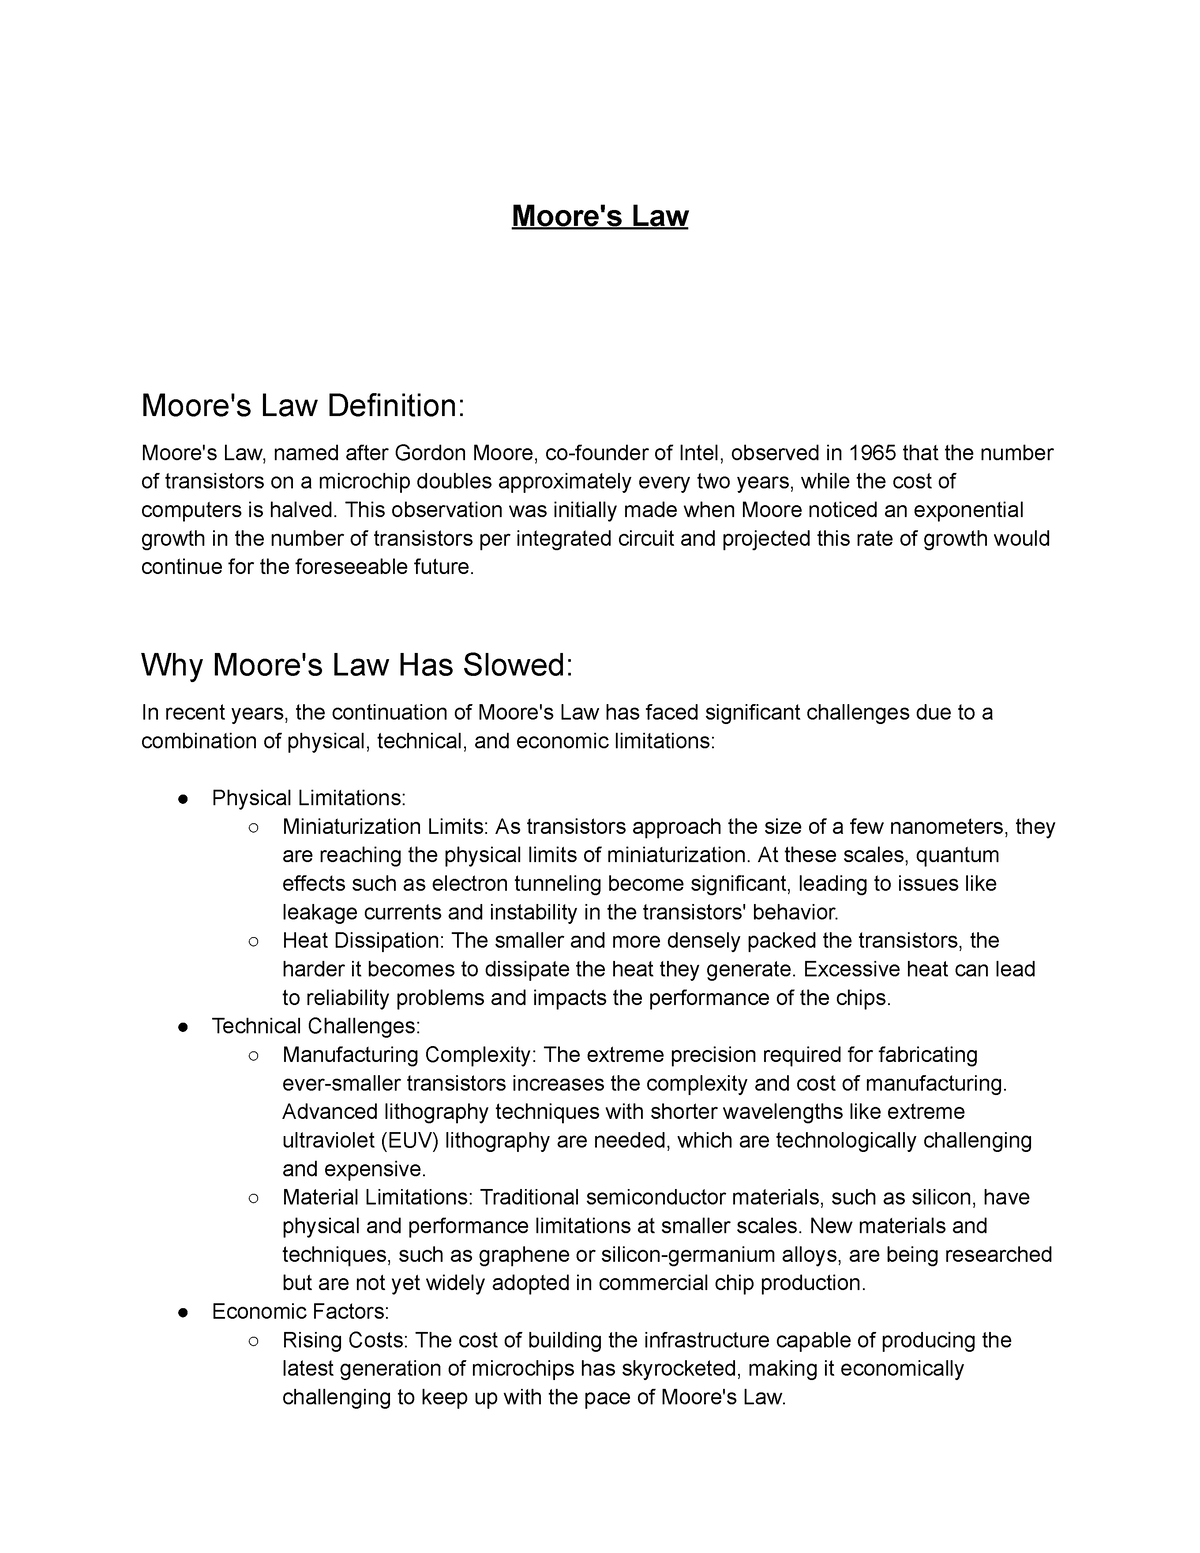 Moore's Law - Moore's Law - Moore's Law Moore's Law Definition: Moore's ...